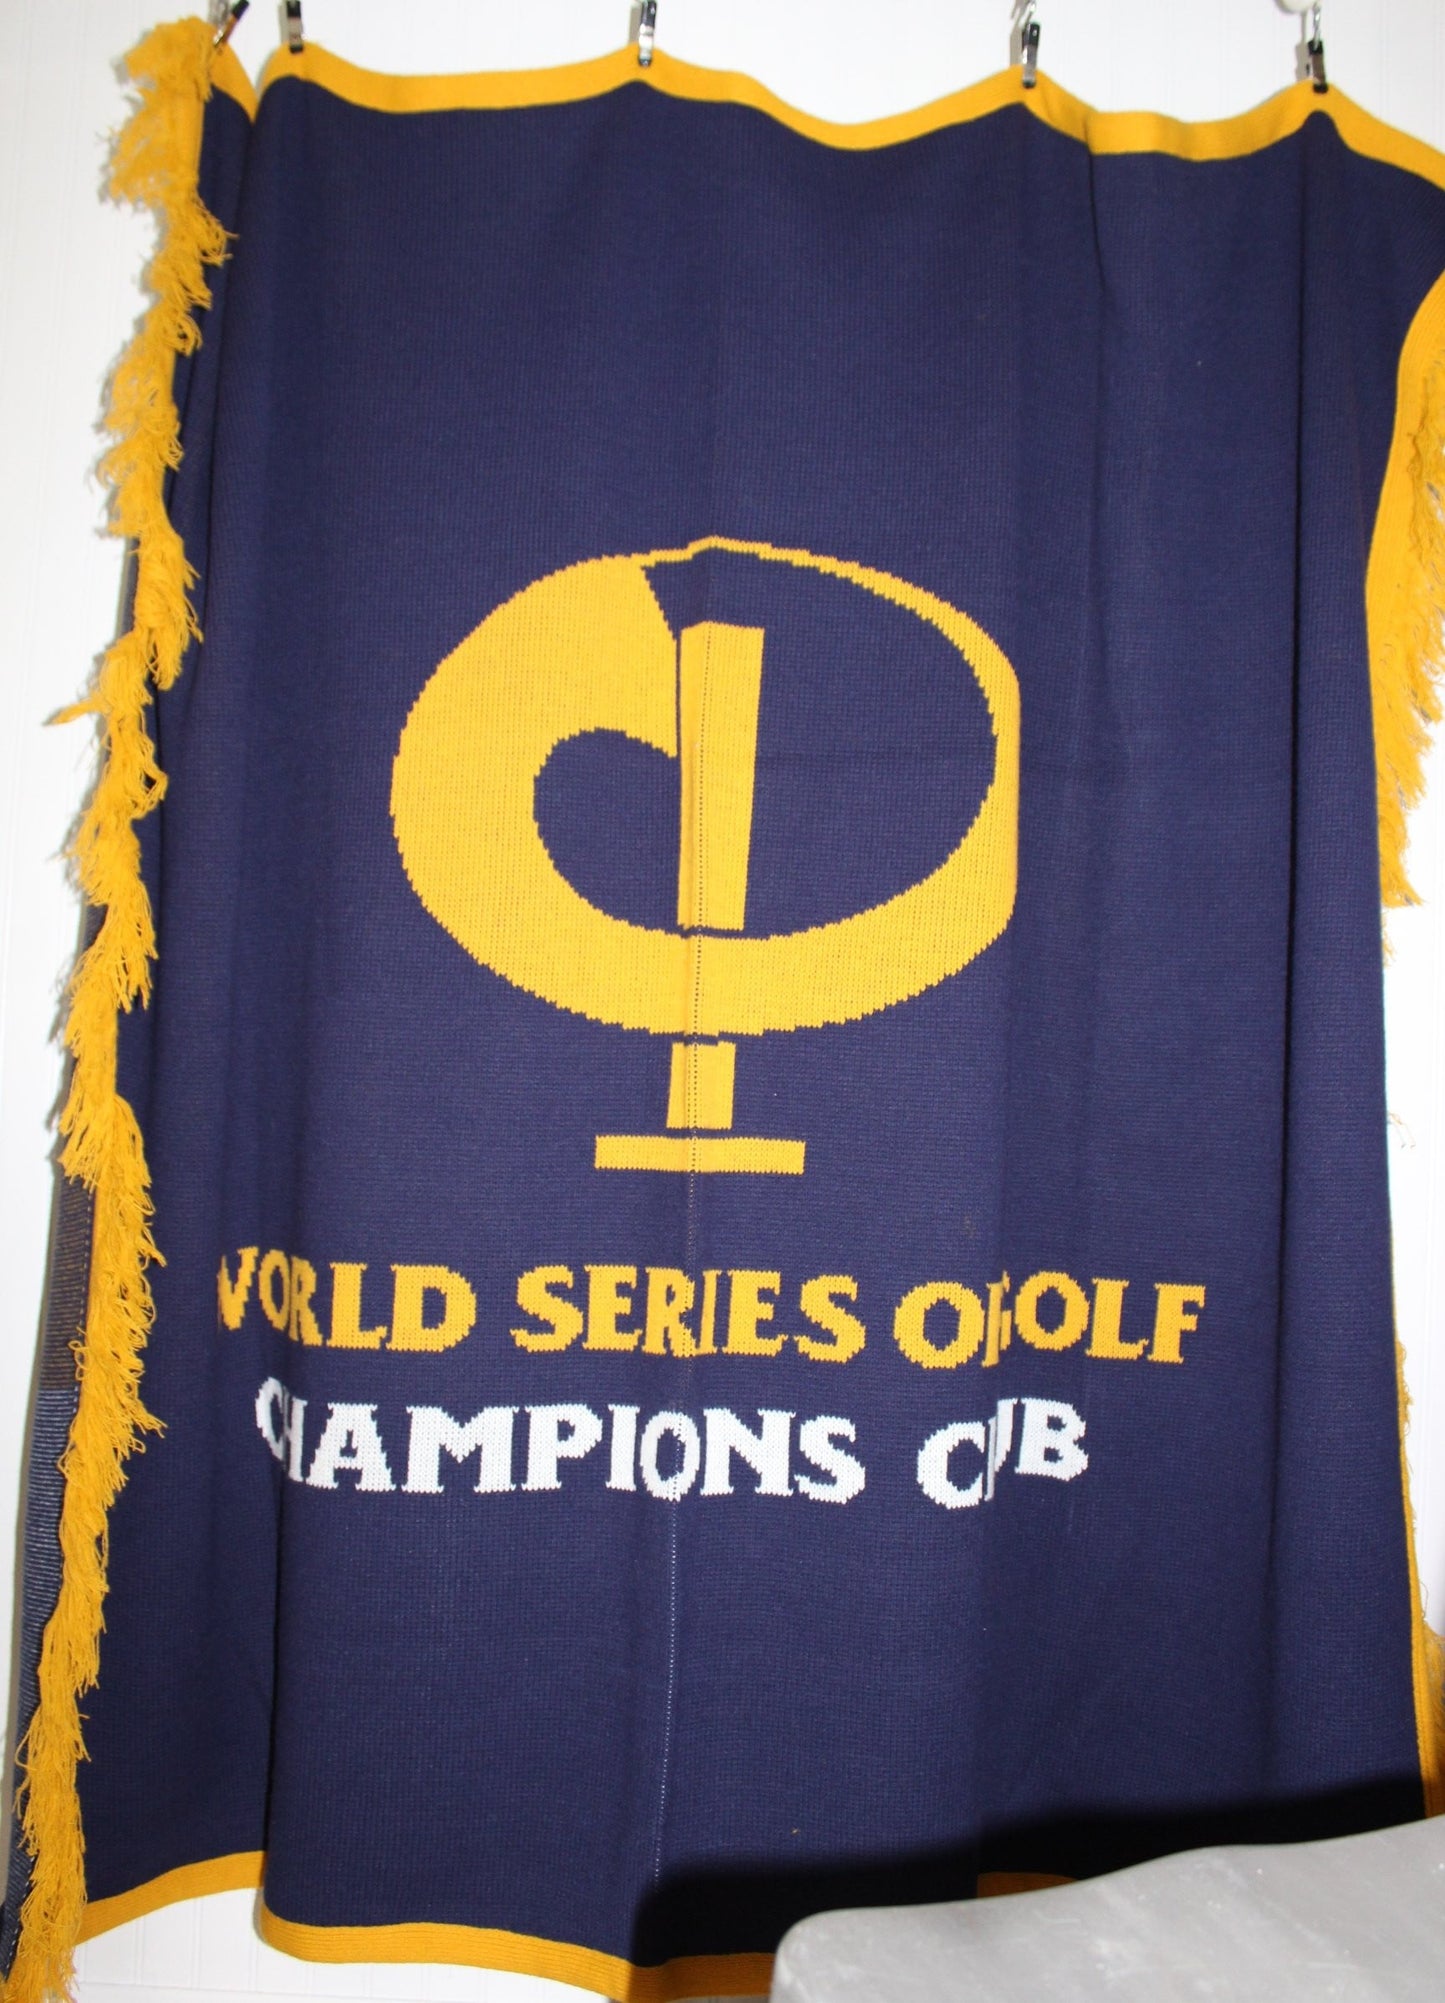 Acrylic Blanket Vintage Collectible LOGO KNITS World Series Golf Champions Club washable